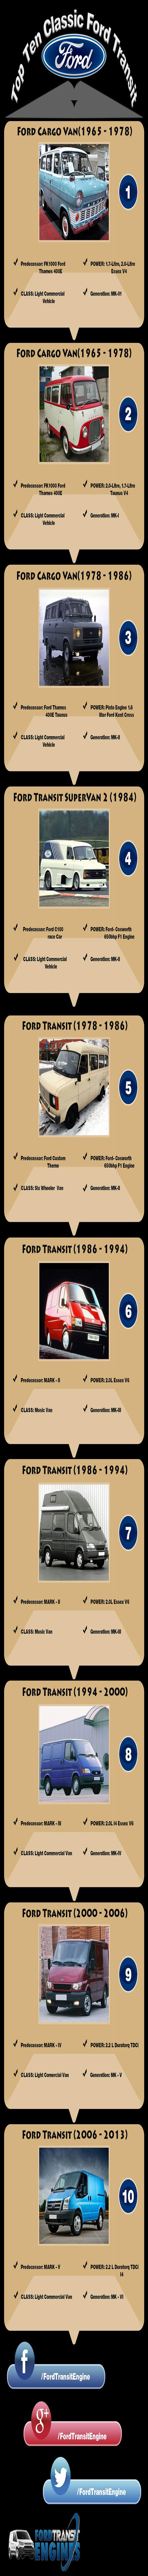 Top Ten Classic Ford Transits